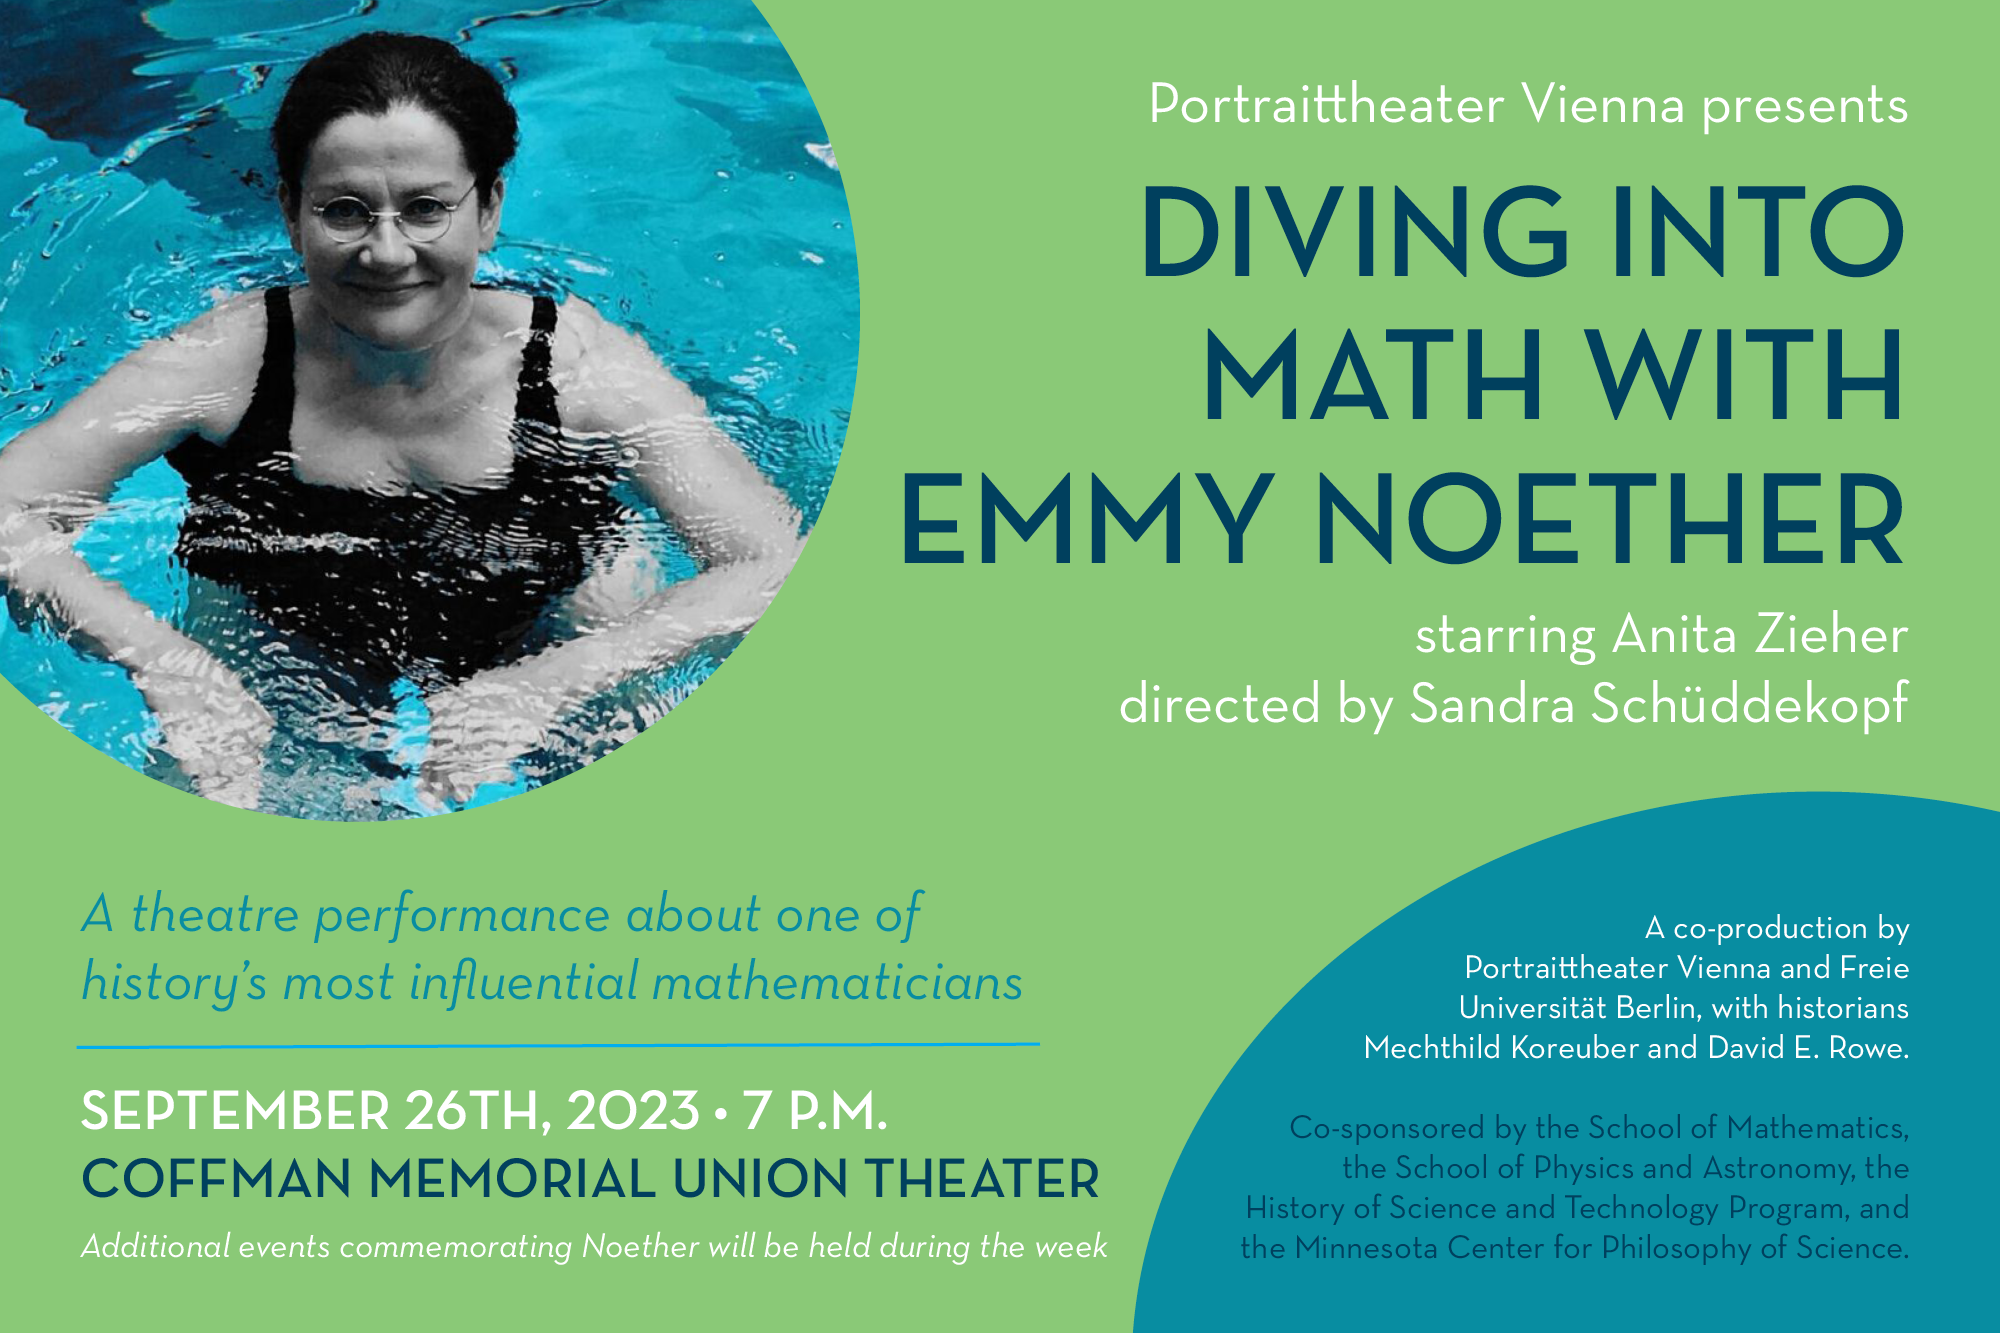 DIVING INTO MATH  WITH EMMY NOETHER: A theatre performance about one of history’s most influential mathematicians